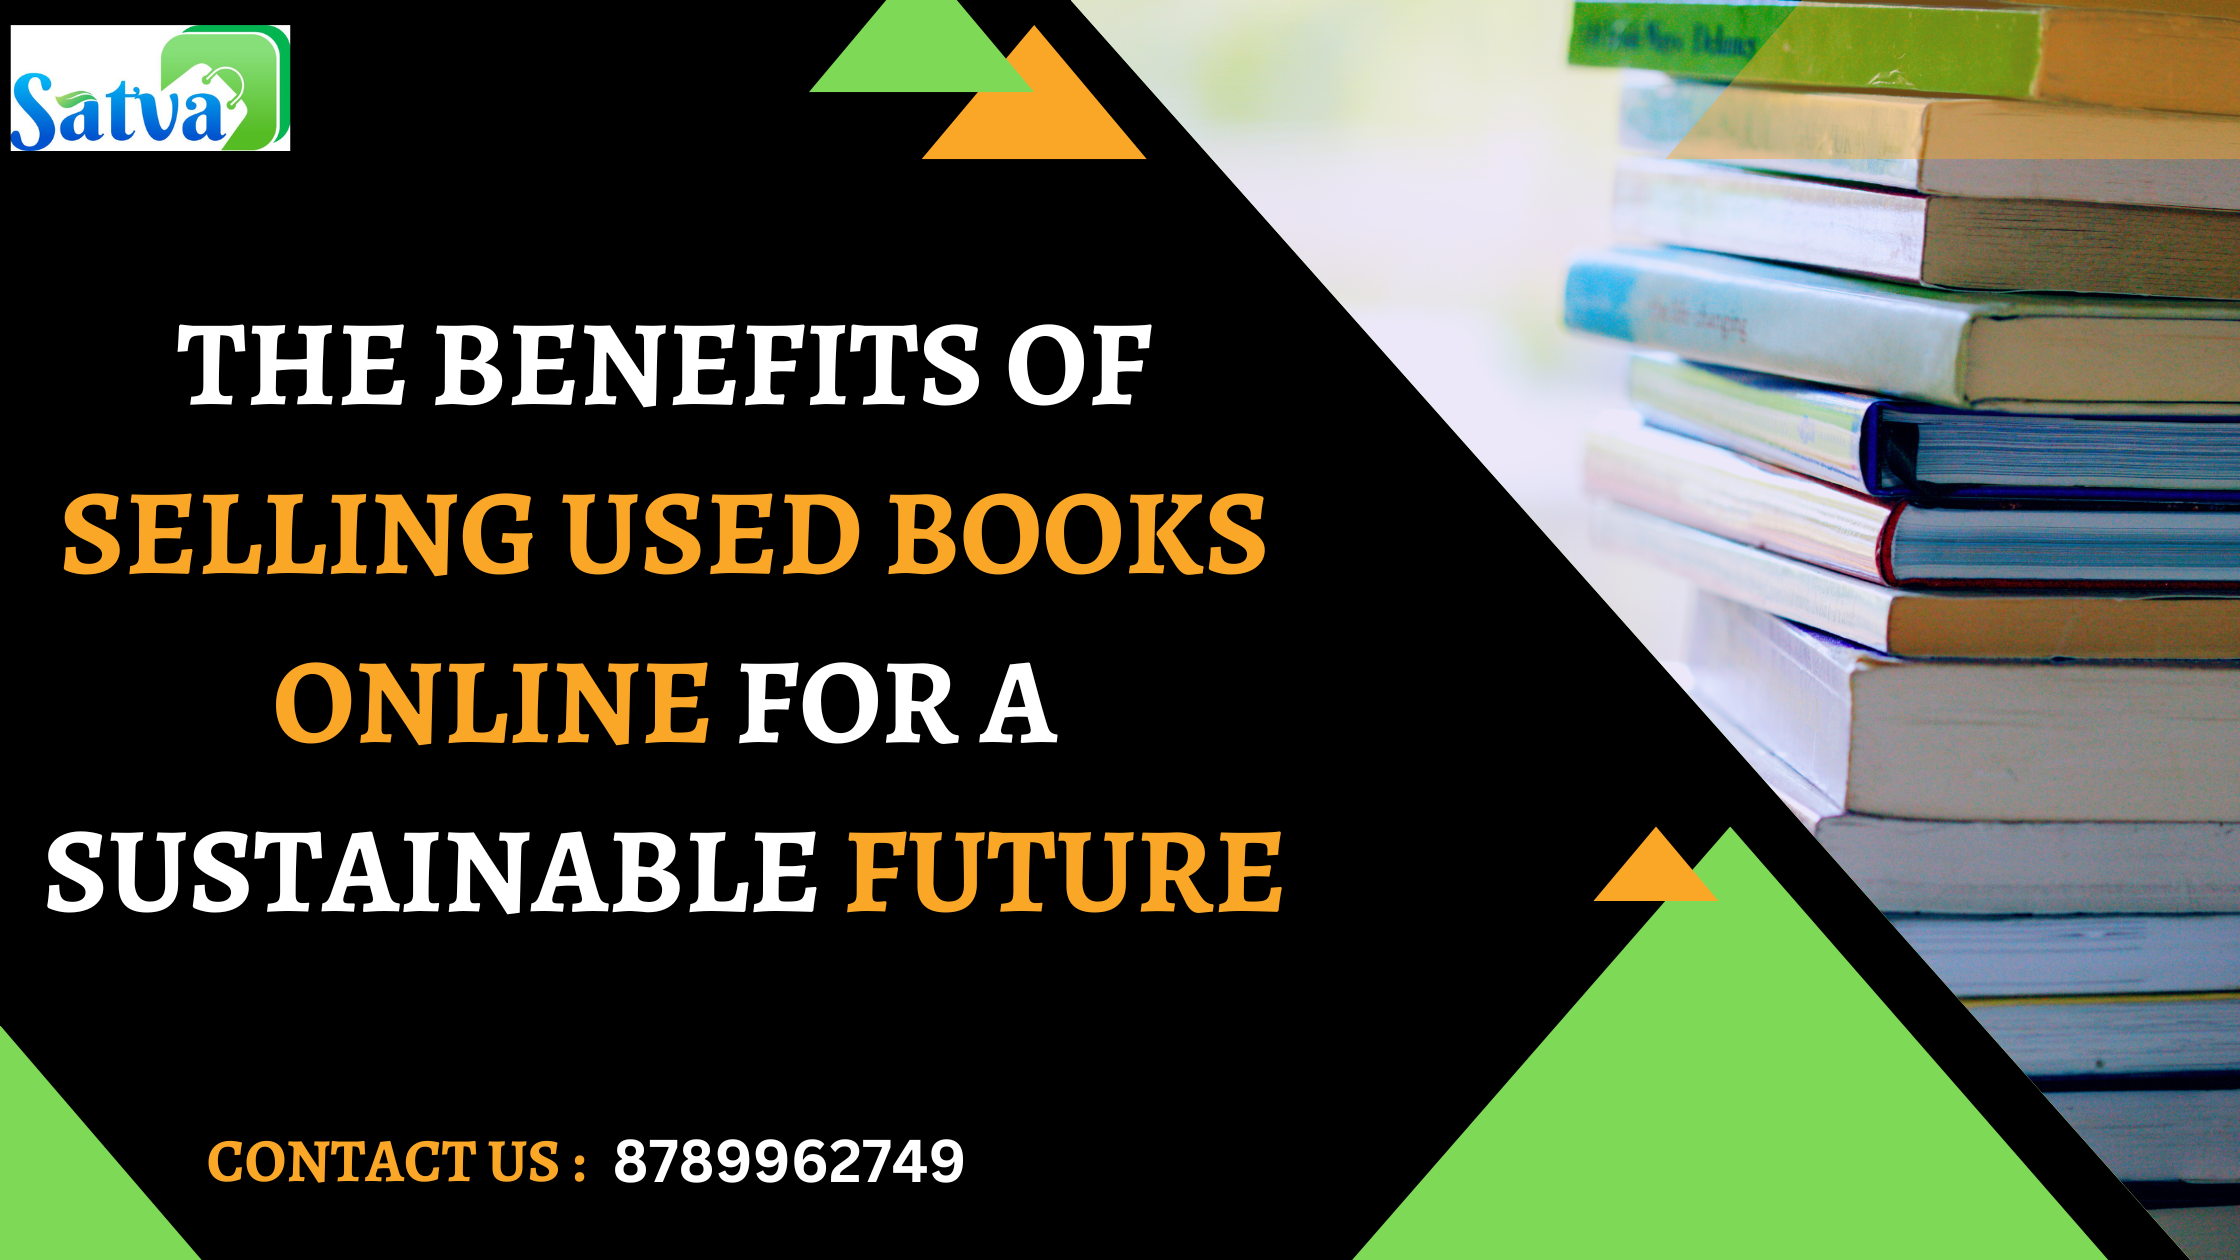 The Benefits of Selling Used Books Online for a Sustainable Future